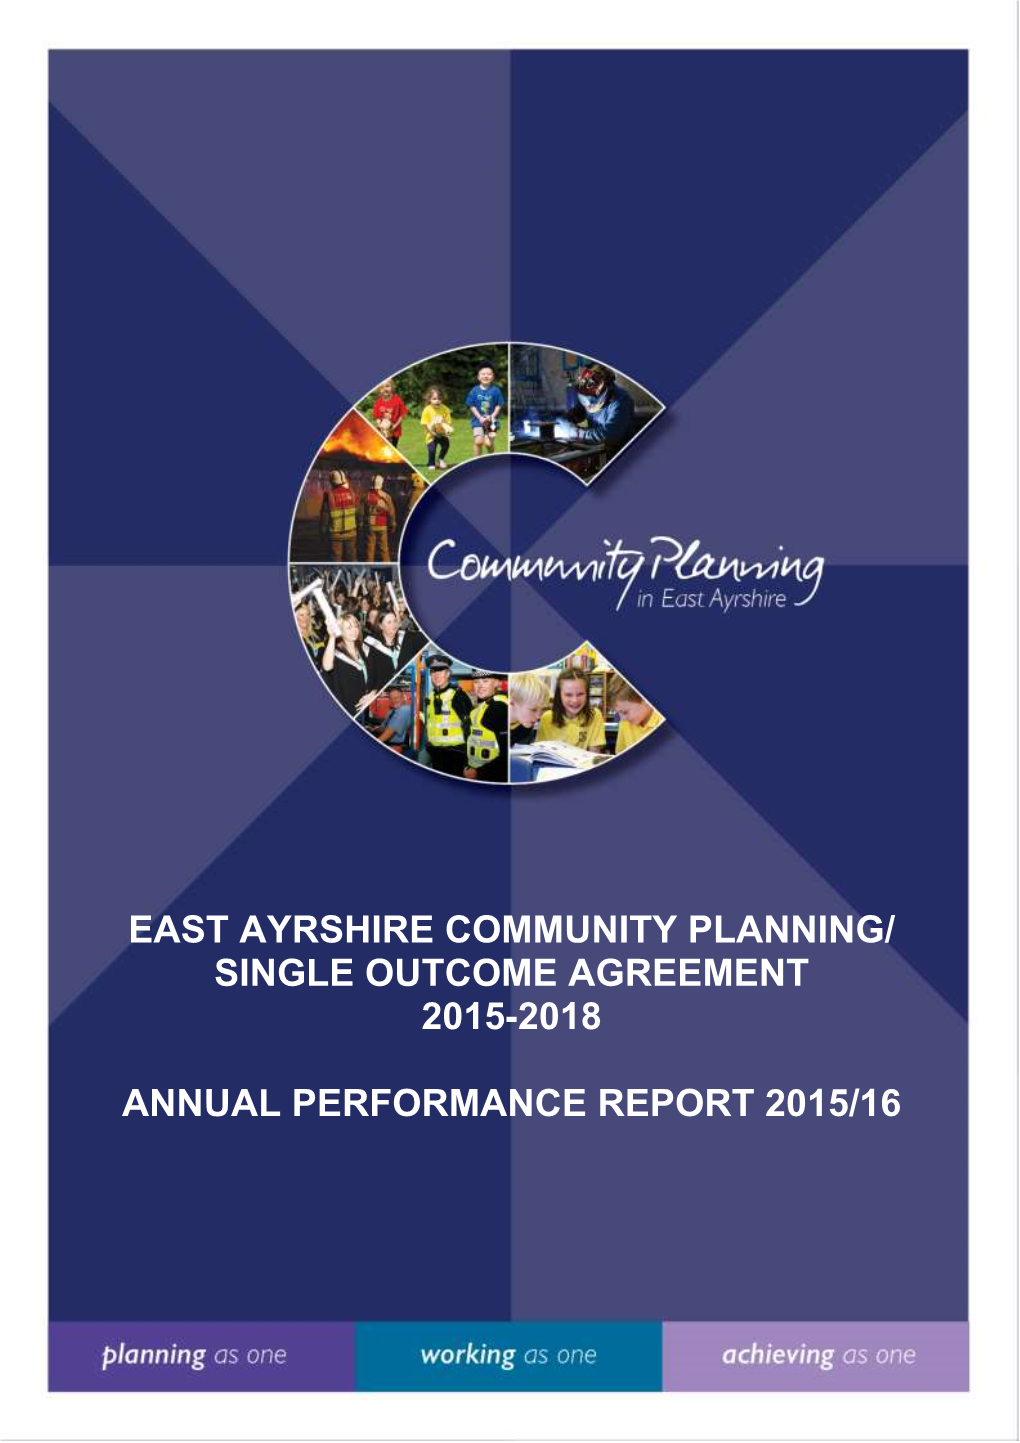 East Ayrshire Community Planning/ Single Outcome Agreement 2015-2018